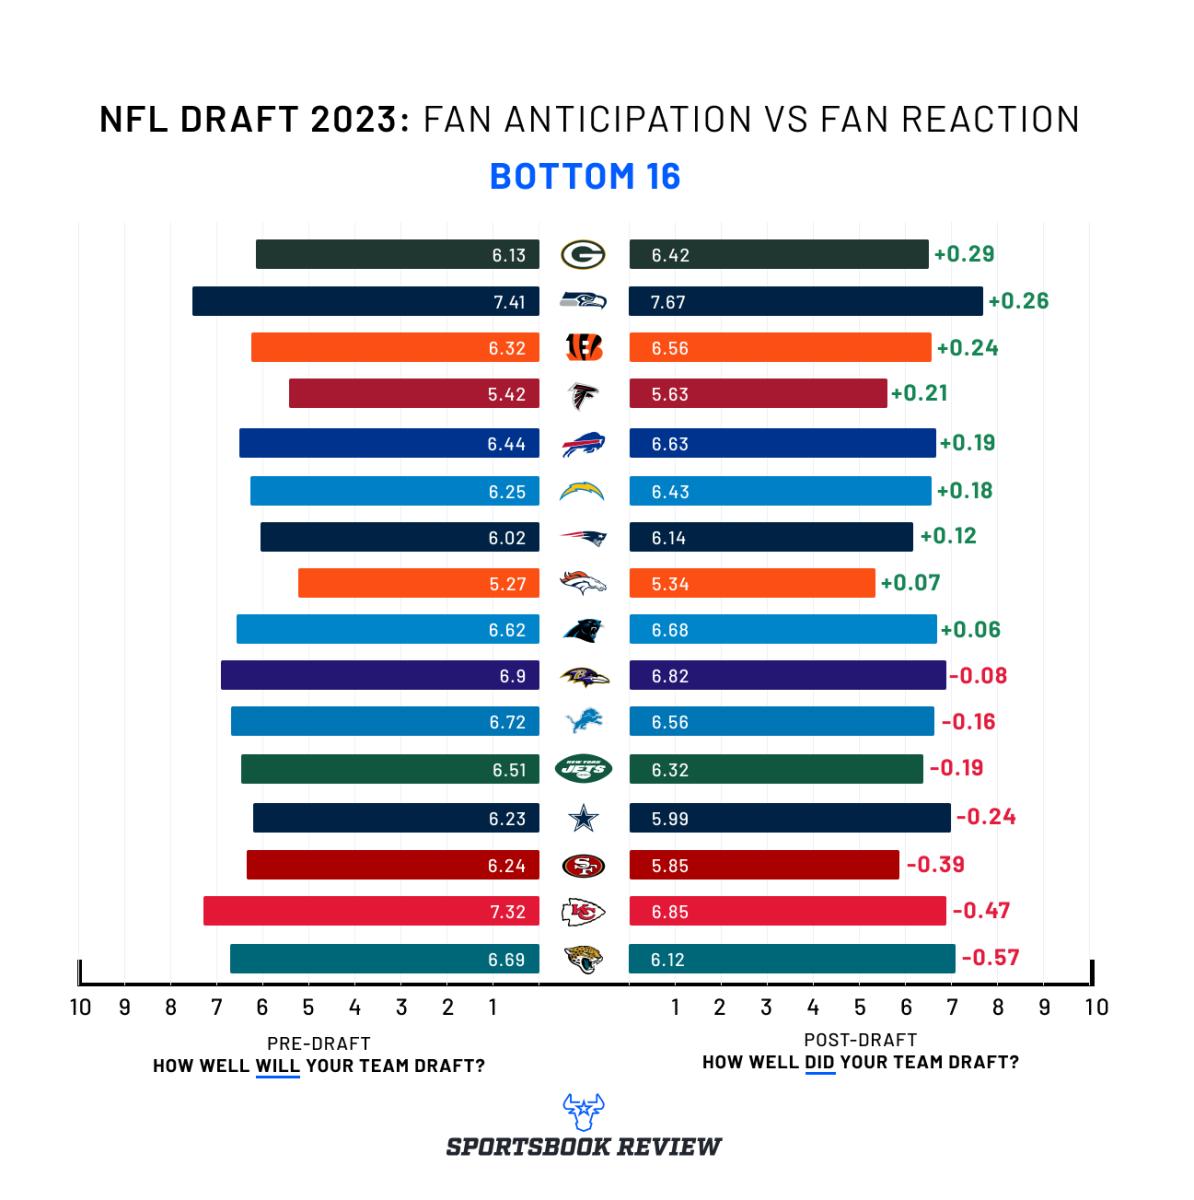 Fan anticipation versus fan reaction for the 2023 NFL Draft. Graphic courtesy of Sportsbook Review.